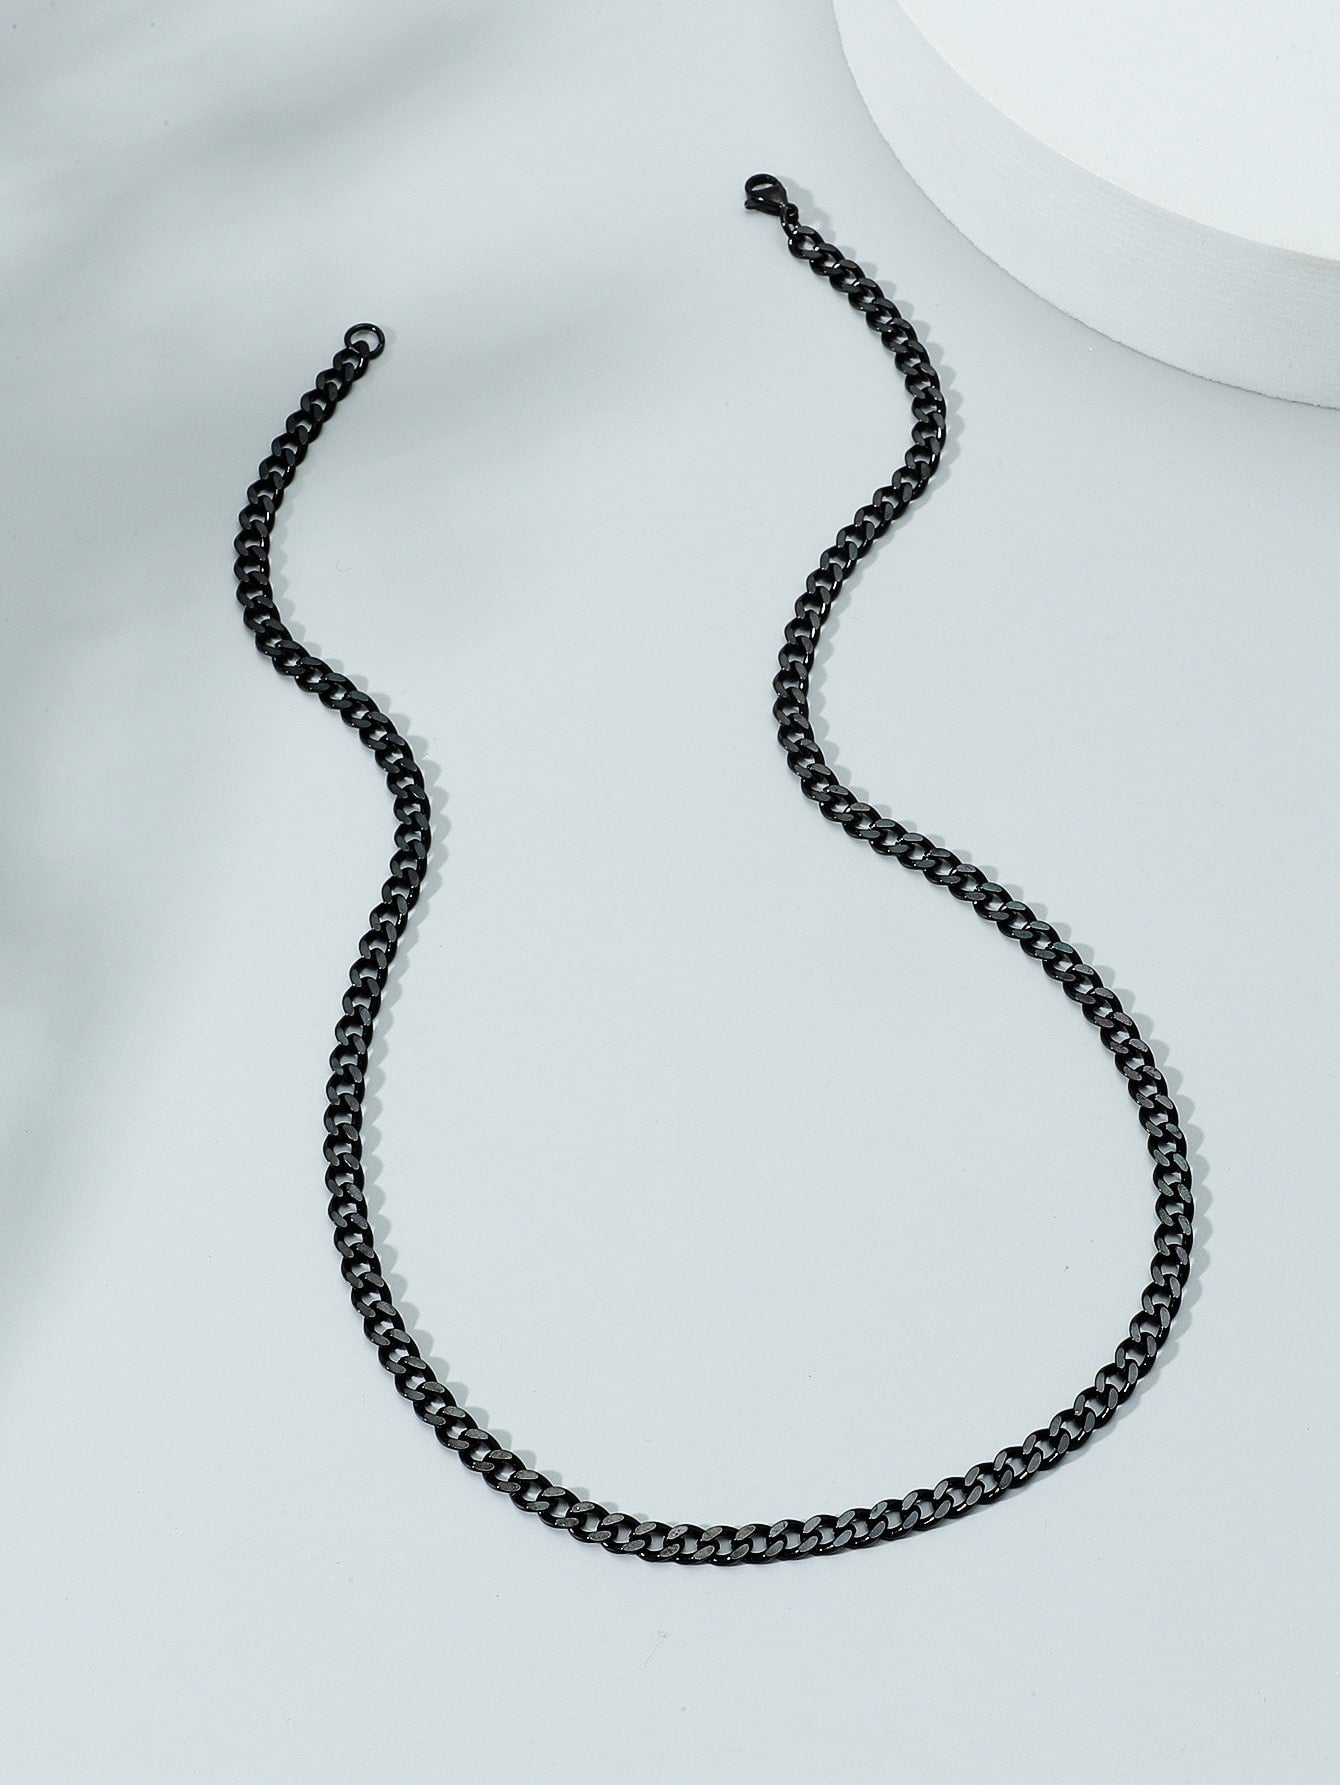 Men's necklace with chain